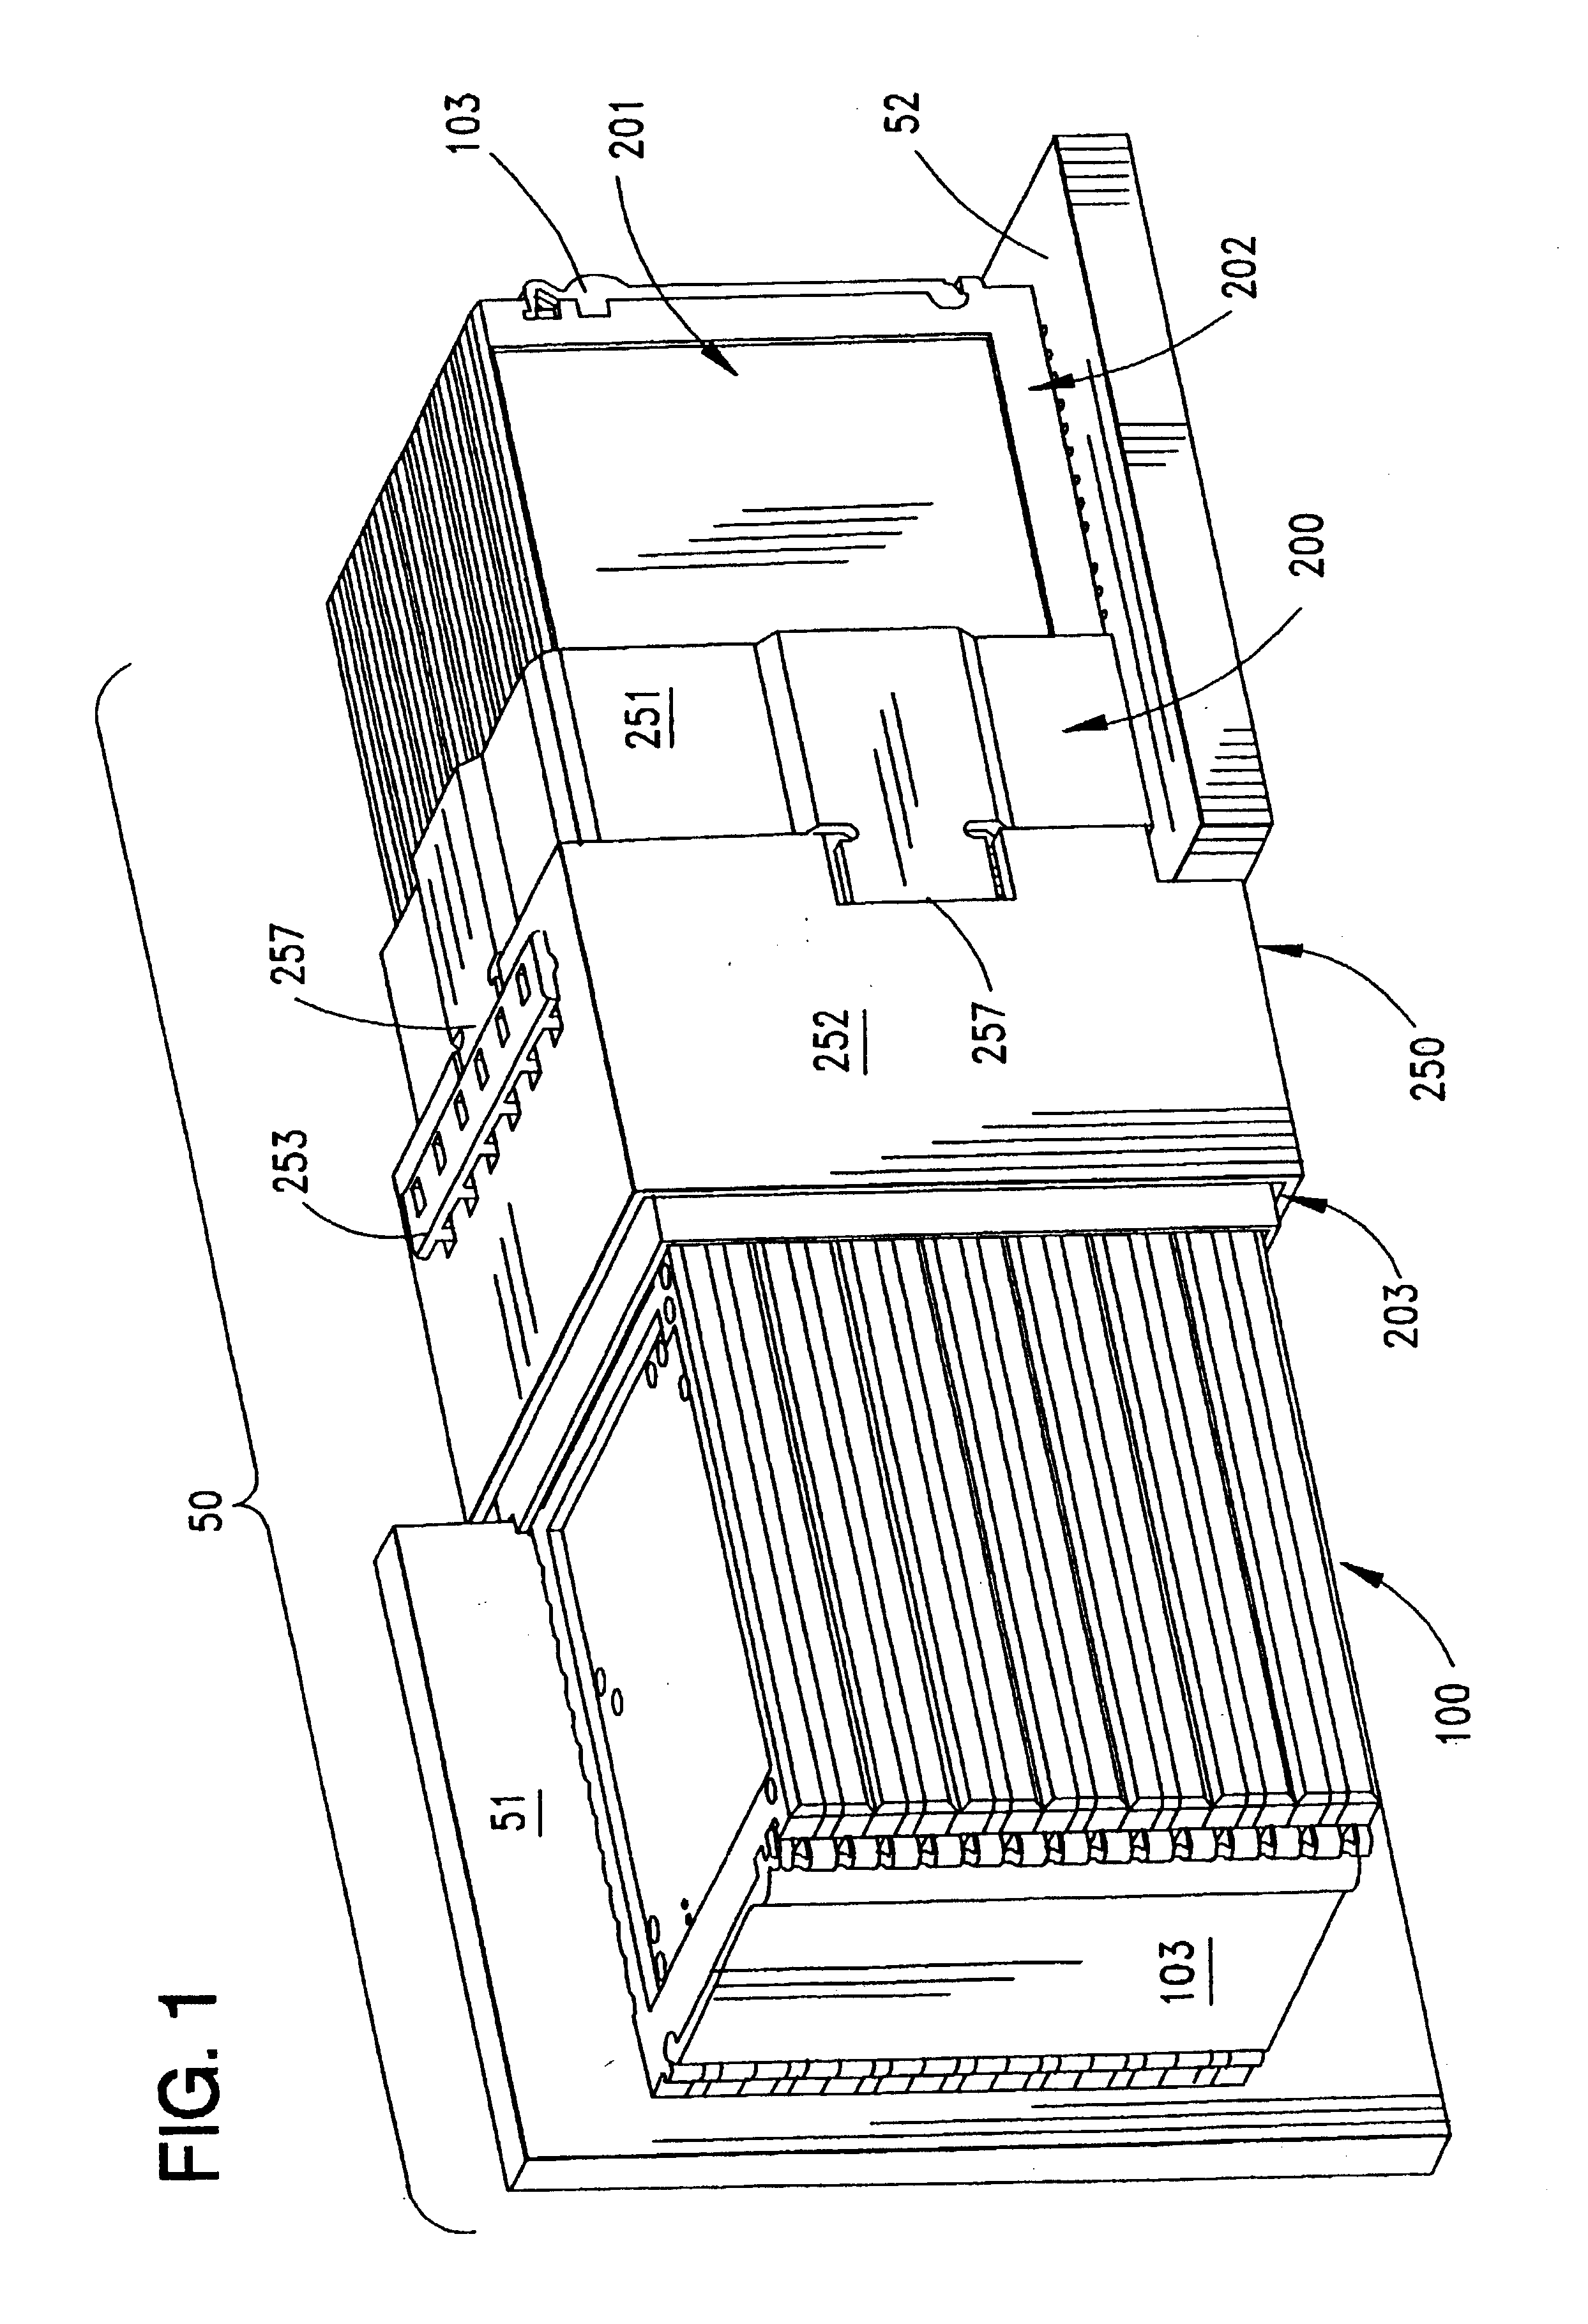 High-density connector assembly with improved mating capability